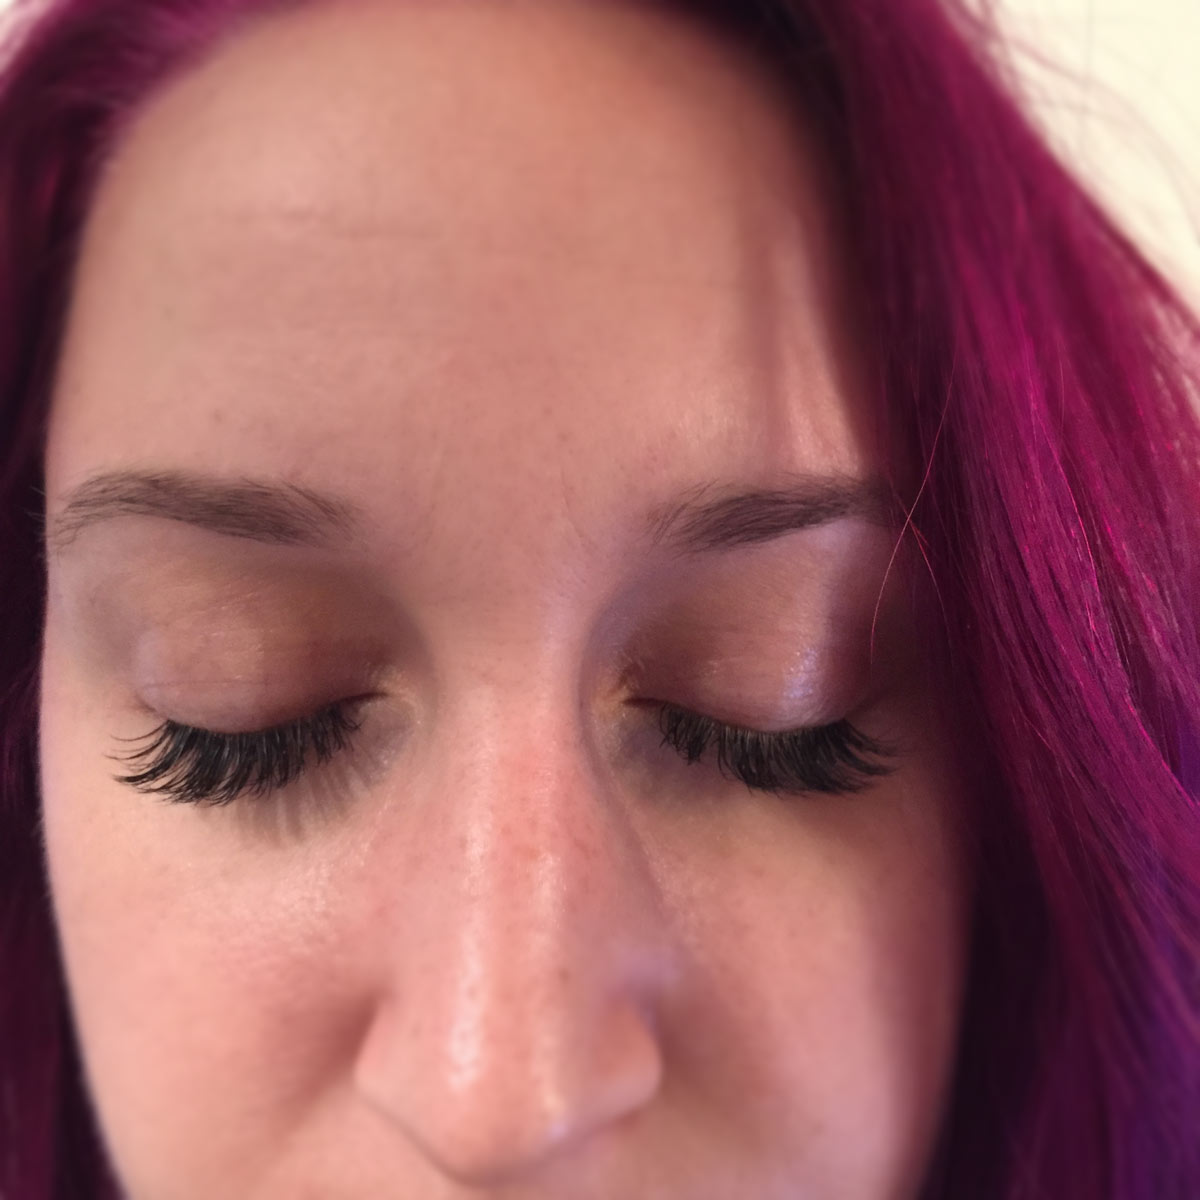 lash extensions and hair color